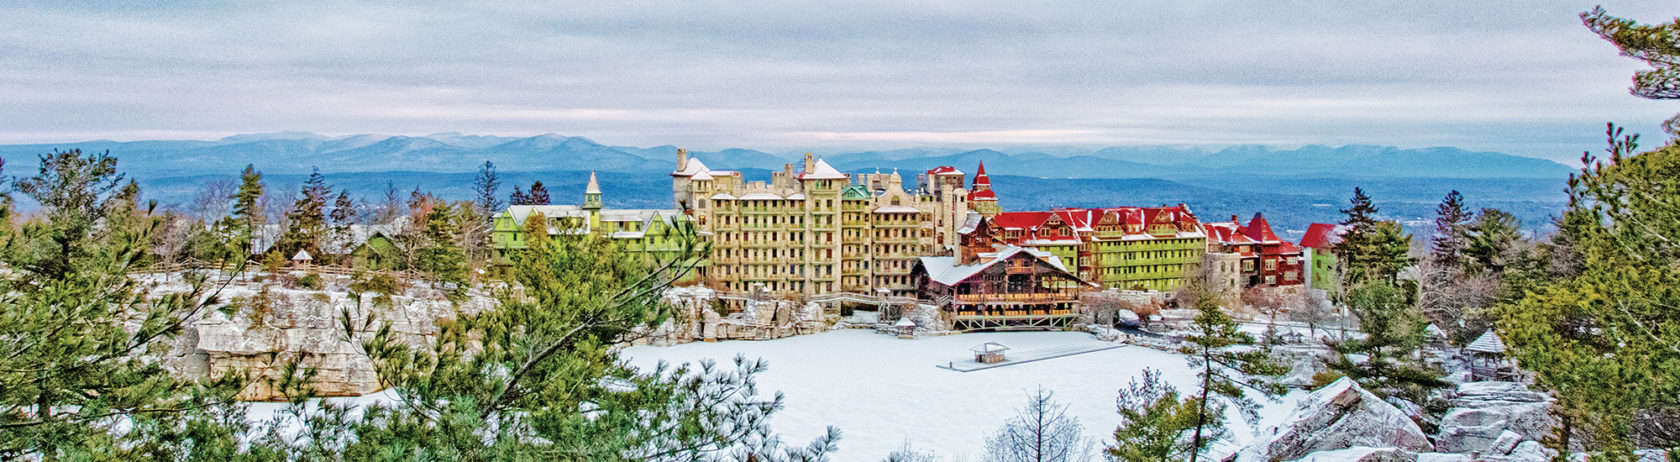 Winter at Mohonk Mountain House